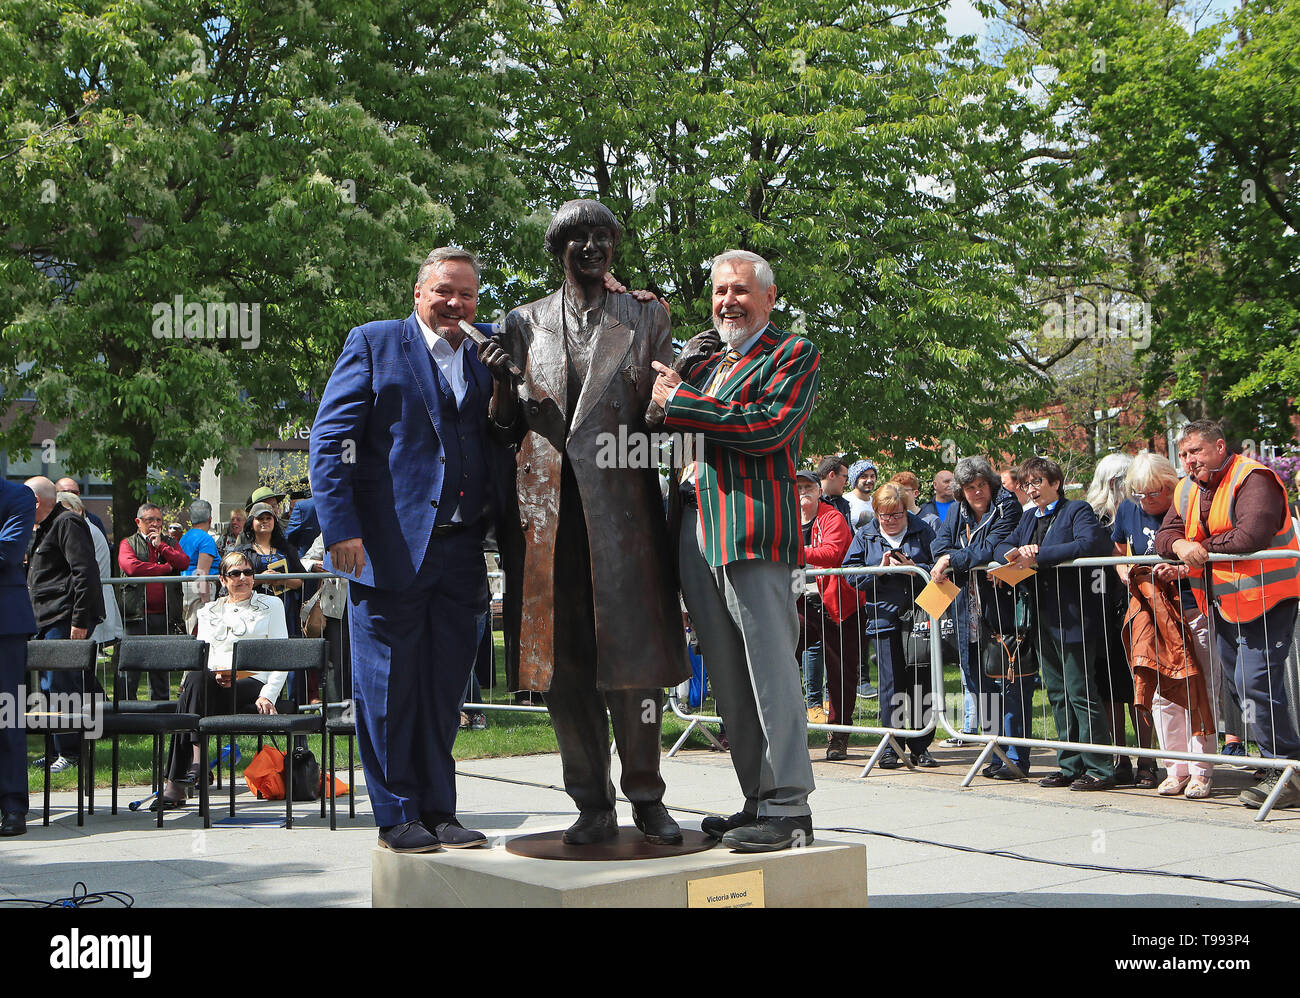 A life-size bronze statue of the late comedian, writer and actor, Victoria Wood is unveiled in Bury town centre by comedian Ted Robbins (left) and her brother Chris Foote Wood. Stock Photo